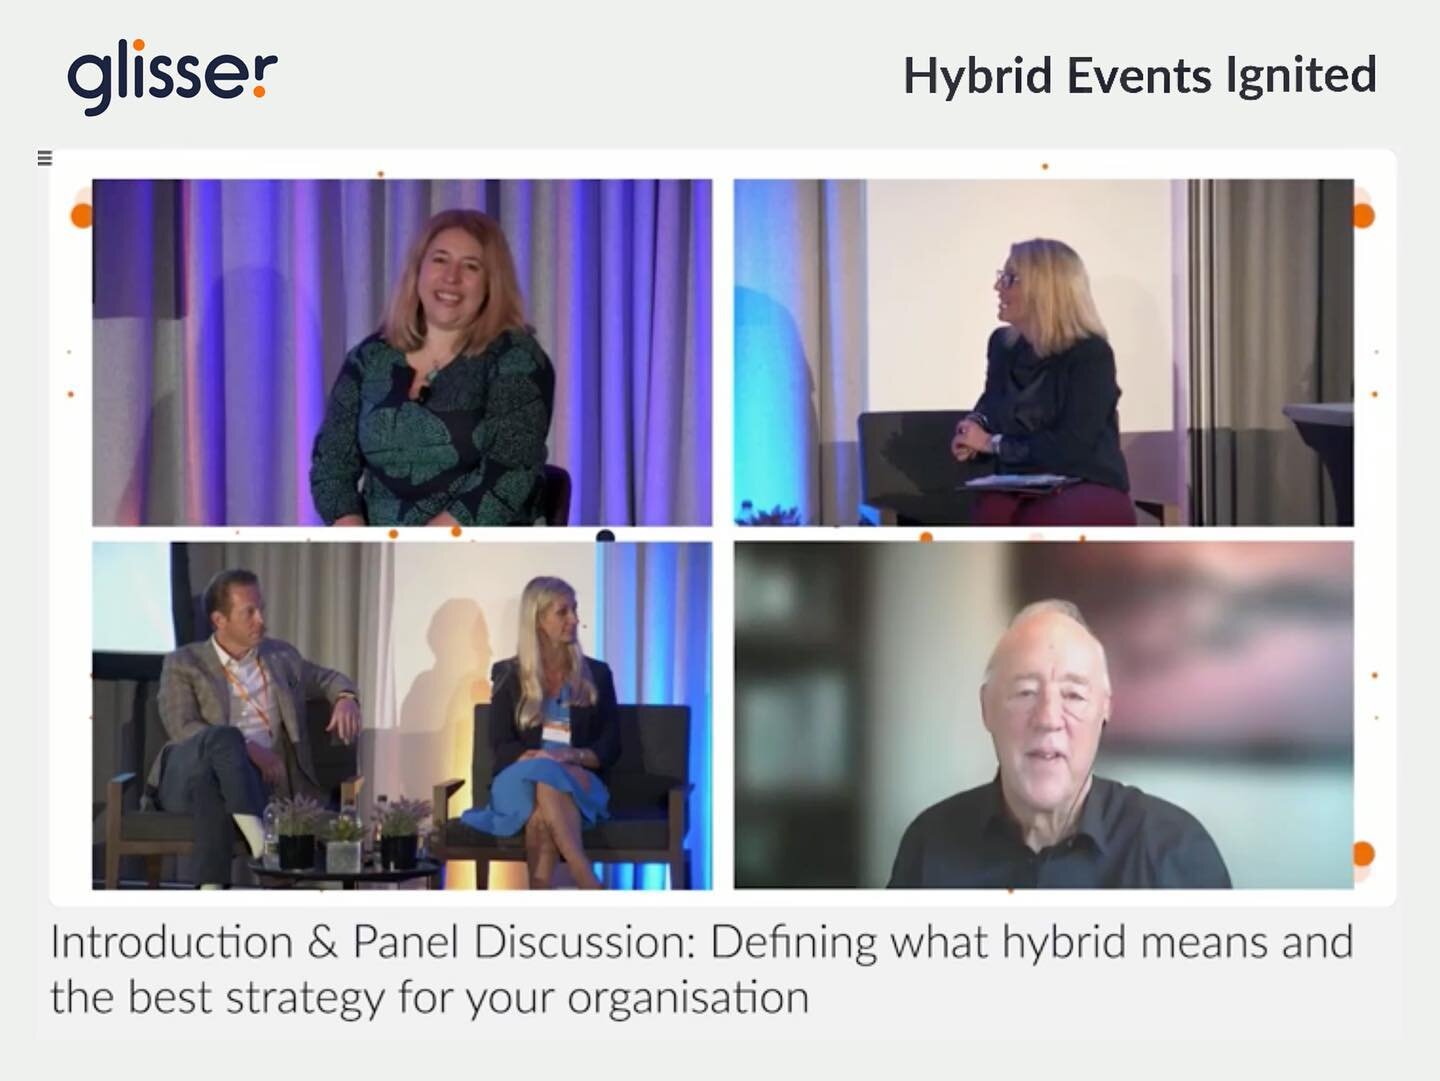 Yesterday, our own Naomi Clare Crellin co-moderated at Hybrid Events Ignited, live from New York! This exciting event hosted by @glisserapp explored the cutting edge in events and was an incredible opportunity for event planners to test tech, assess 